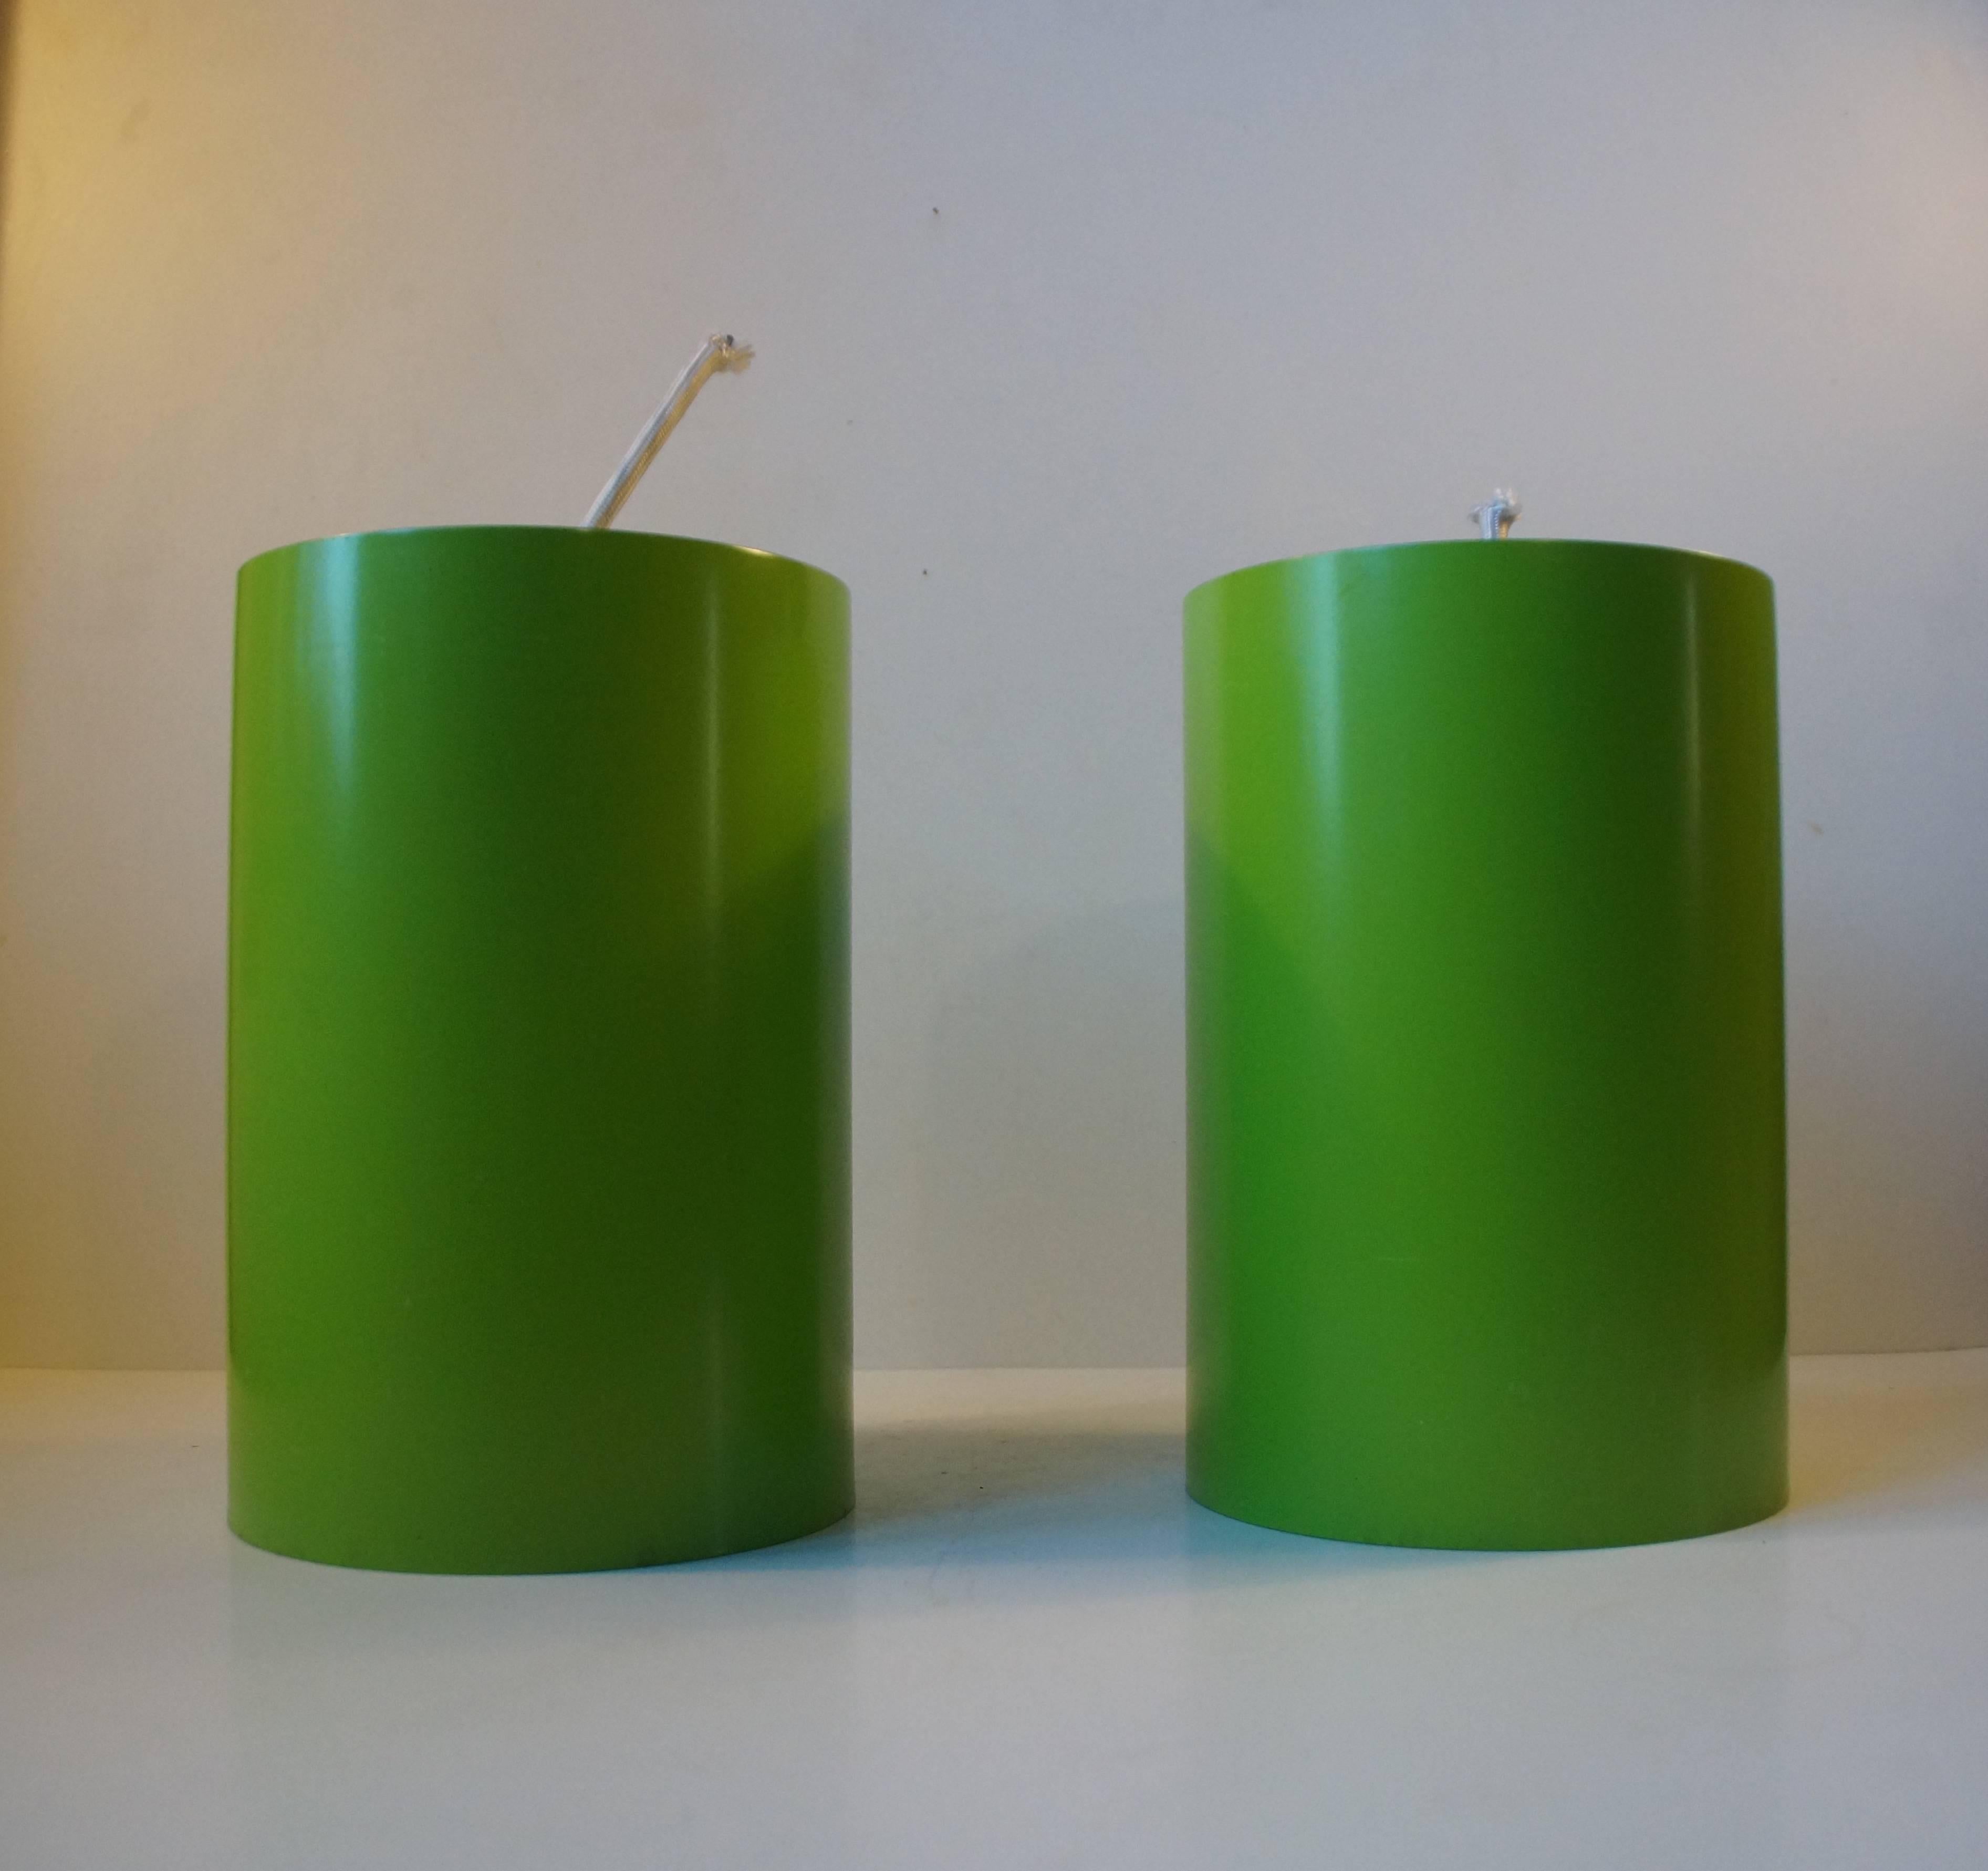 Powder-Coated Green Cylindrical Pendant Lamps from Louis Poulsen, 1970s